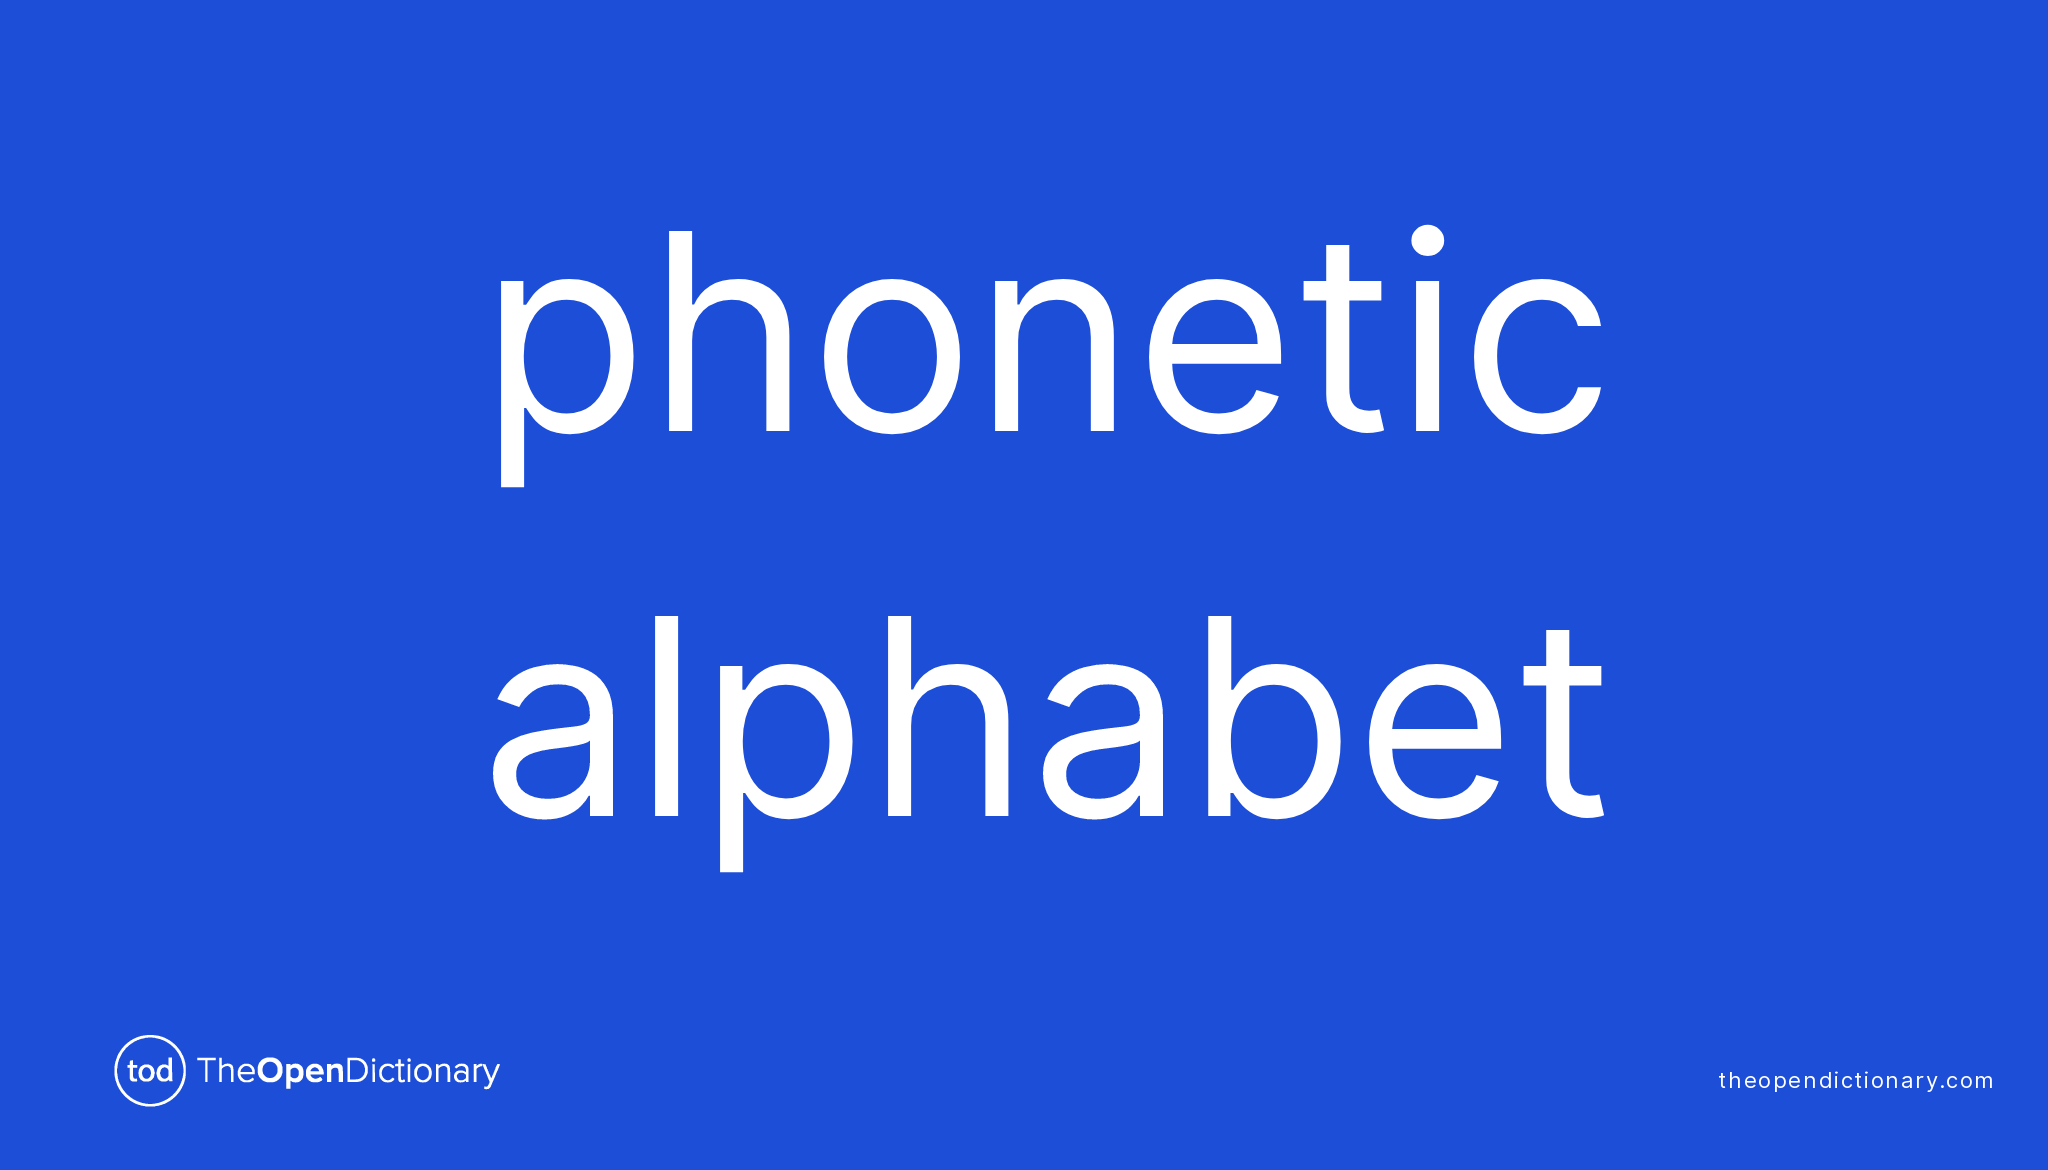 Phonetic alphabet | Meaning of Phonetic alphabet | Definition of ...